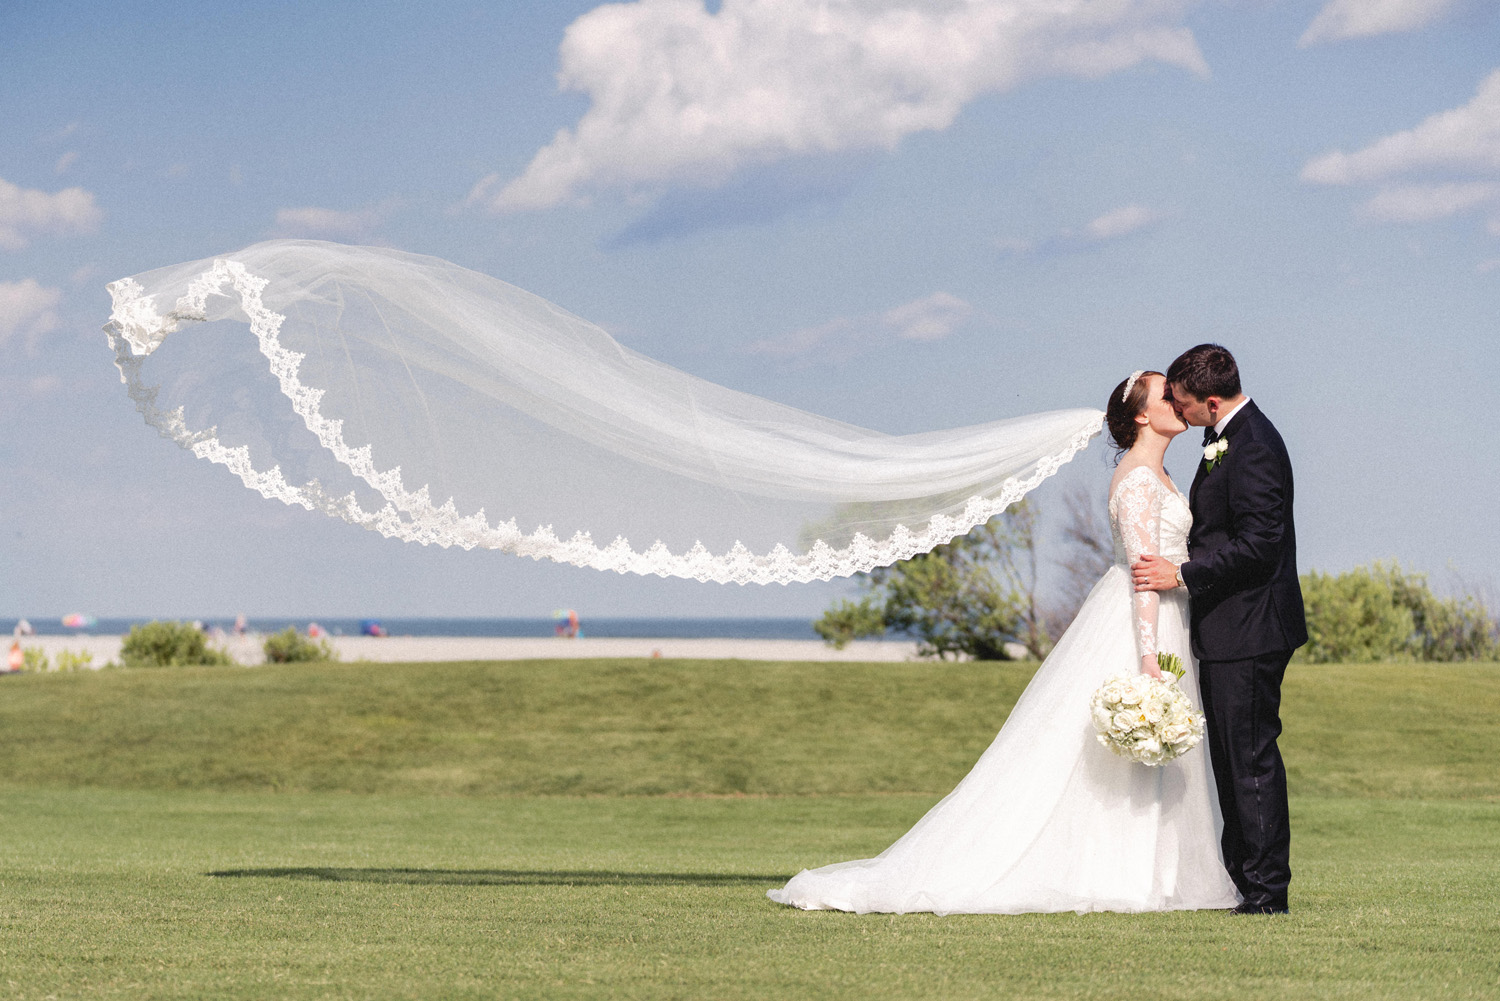 flying veil bride and groom portrait at The Dunes Club by Myrtle Beach wedding photographer gillian claire